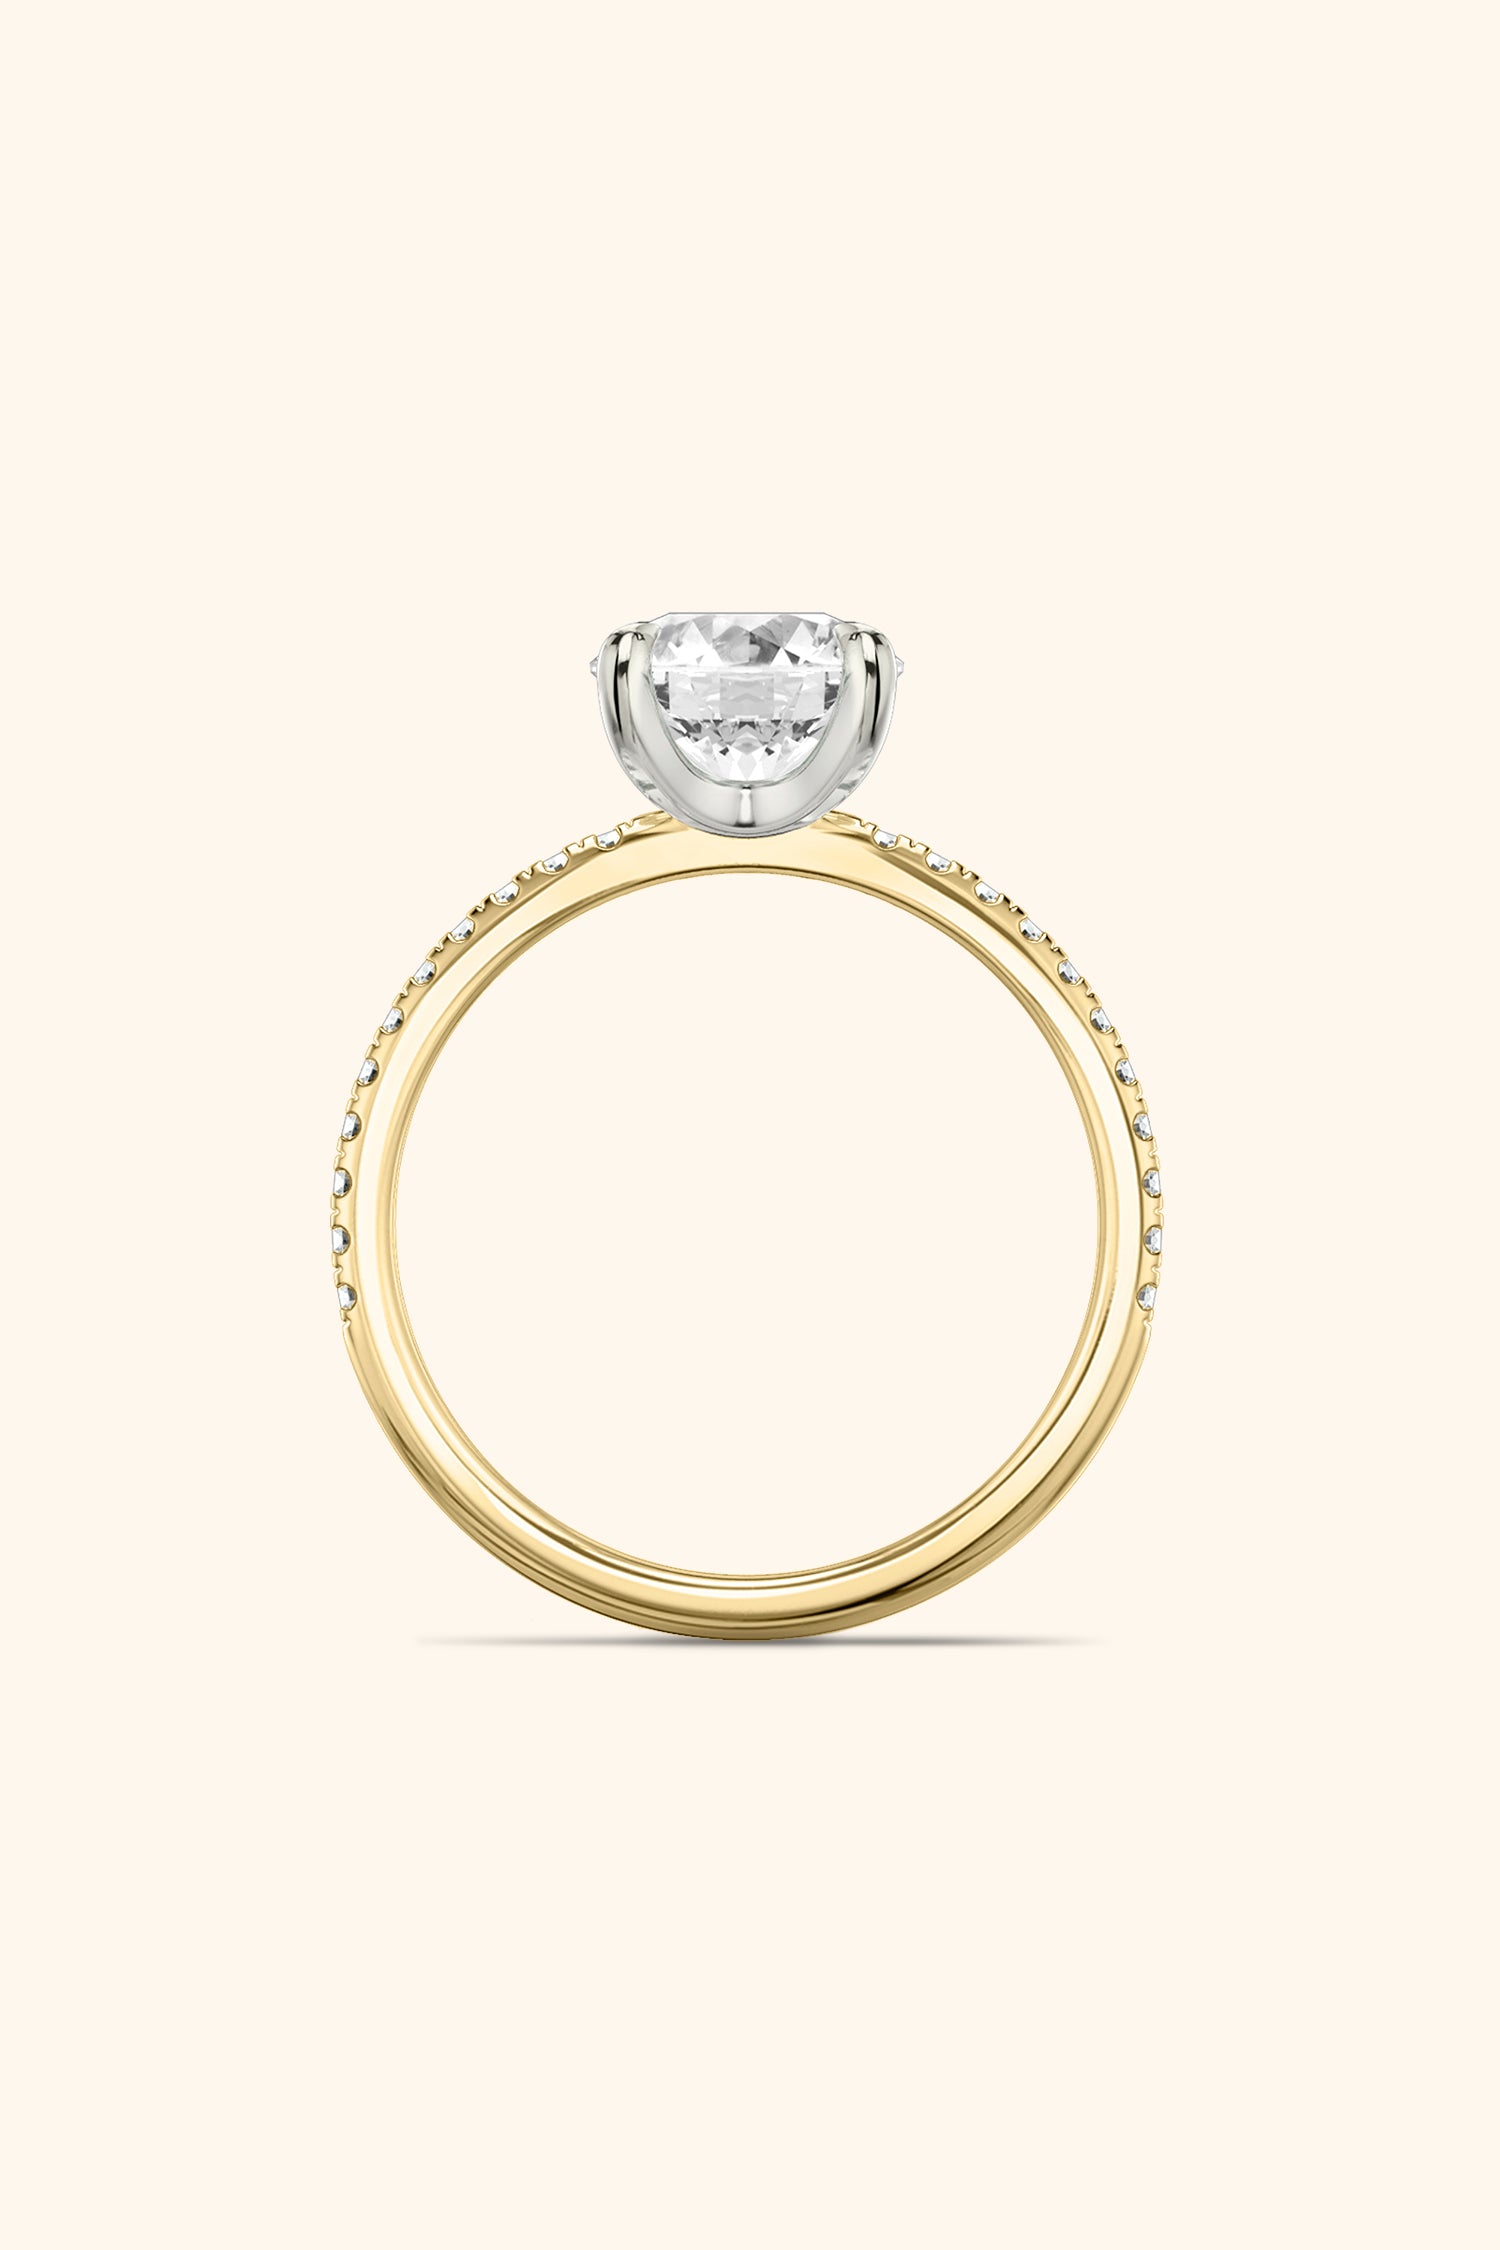 Dual Tone Glance Pave Ring with 1 Carat Round Brilliant Solitaire